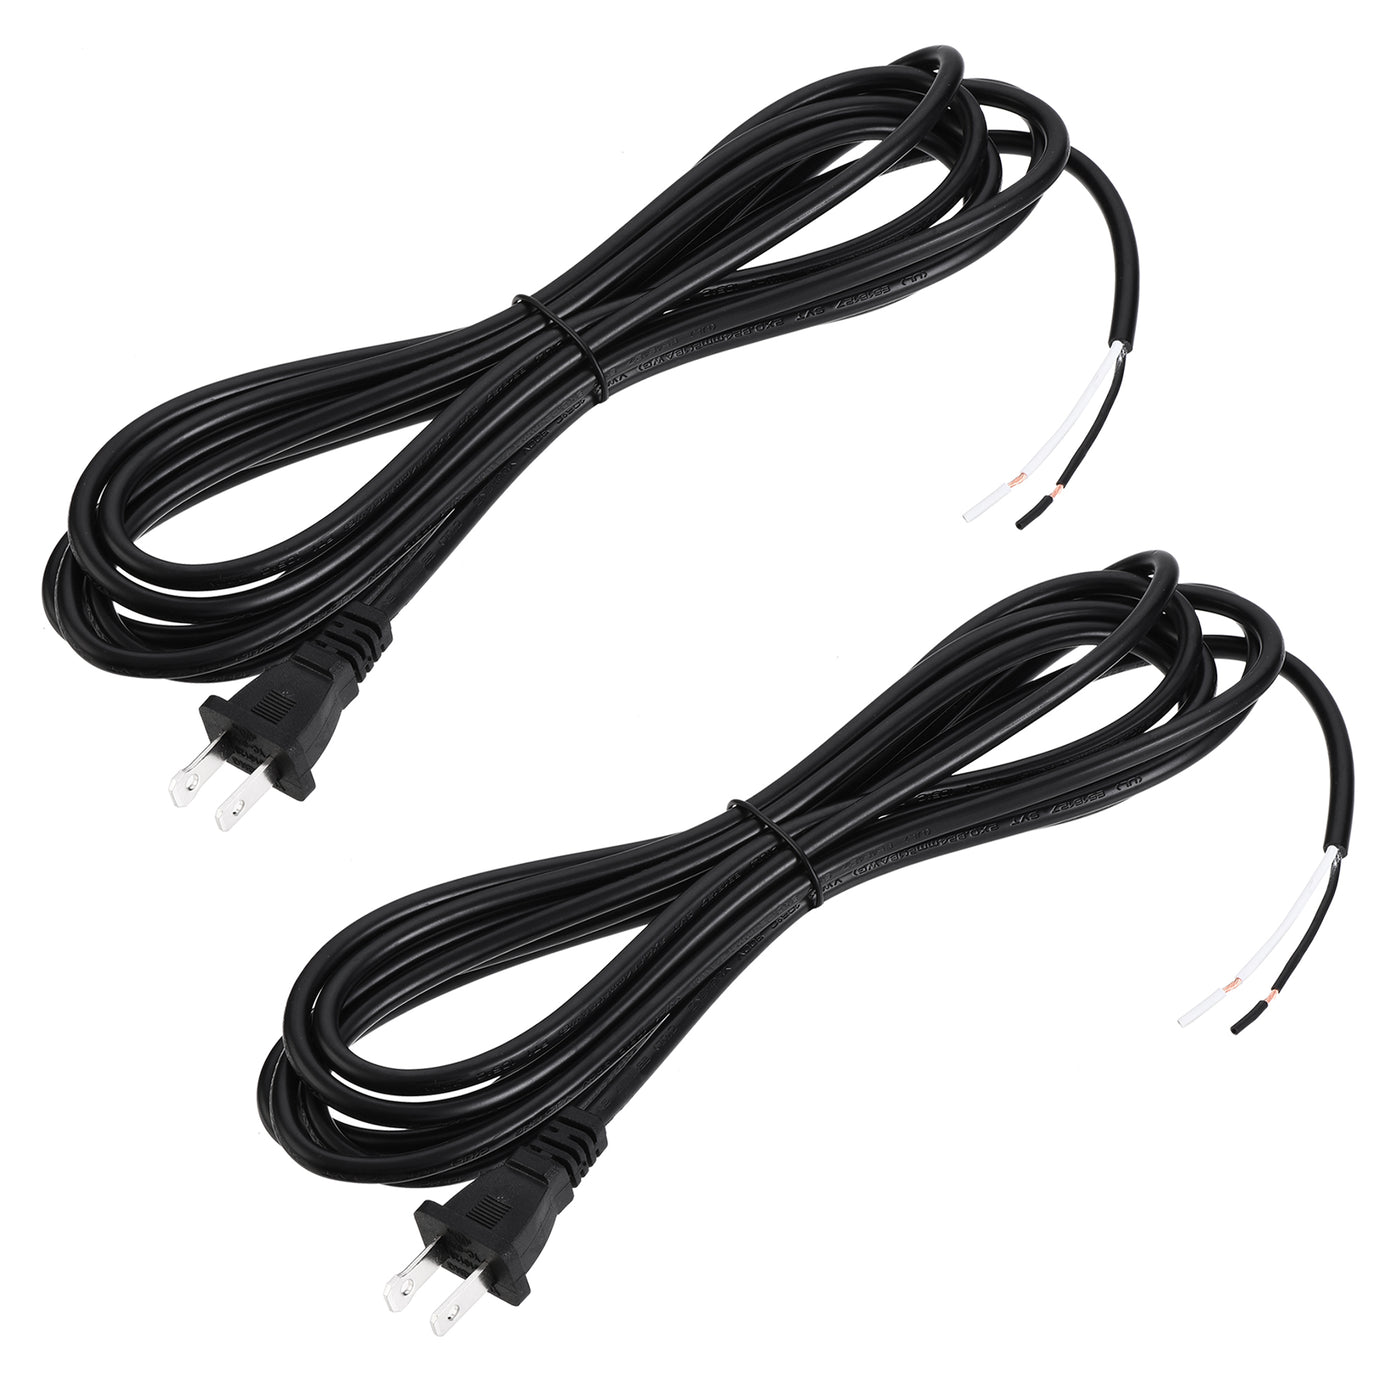 uxcell Uxcell US Plug Lamp Cord, SVT 18AWG Power Wire 3.5M Black, UL Listed, Pack of 2